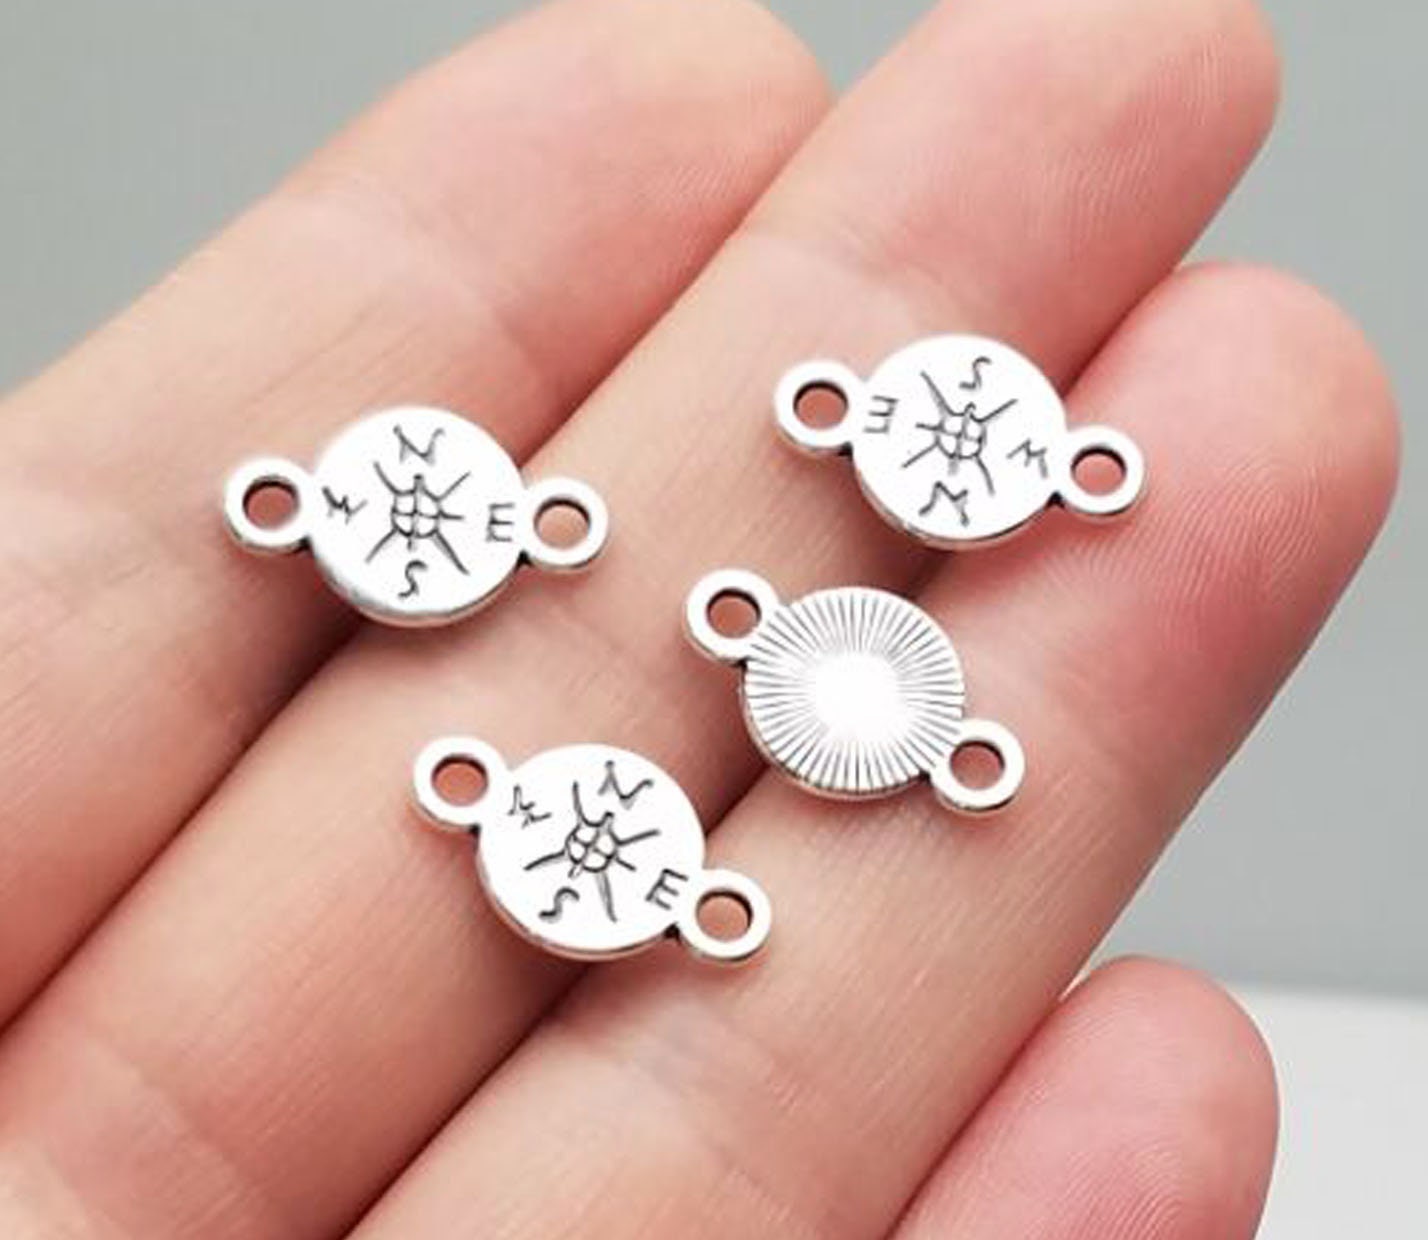 Lot 50pcs Flower Antique Silver Charms Pendant Connector DIY Jewelry Findings 